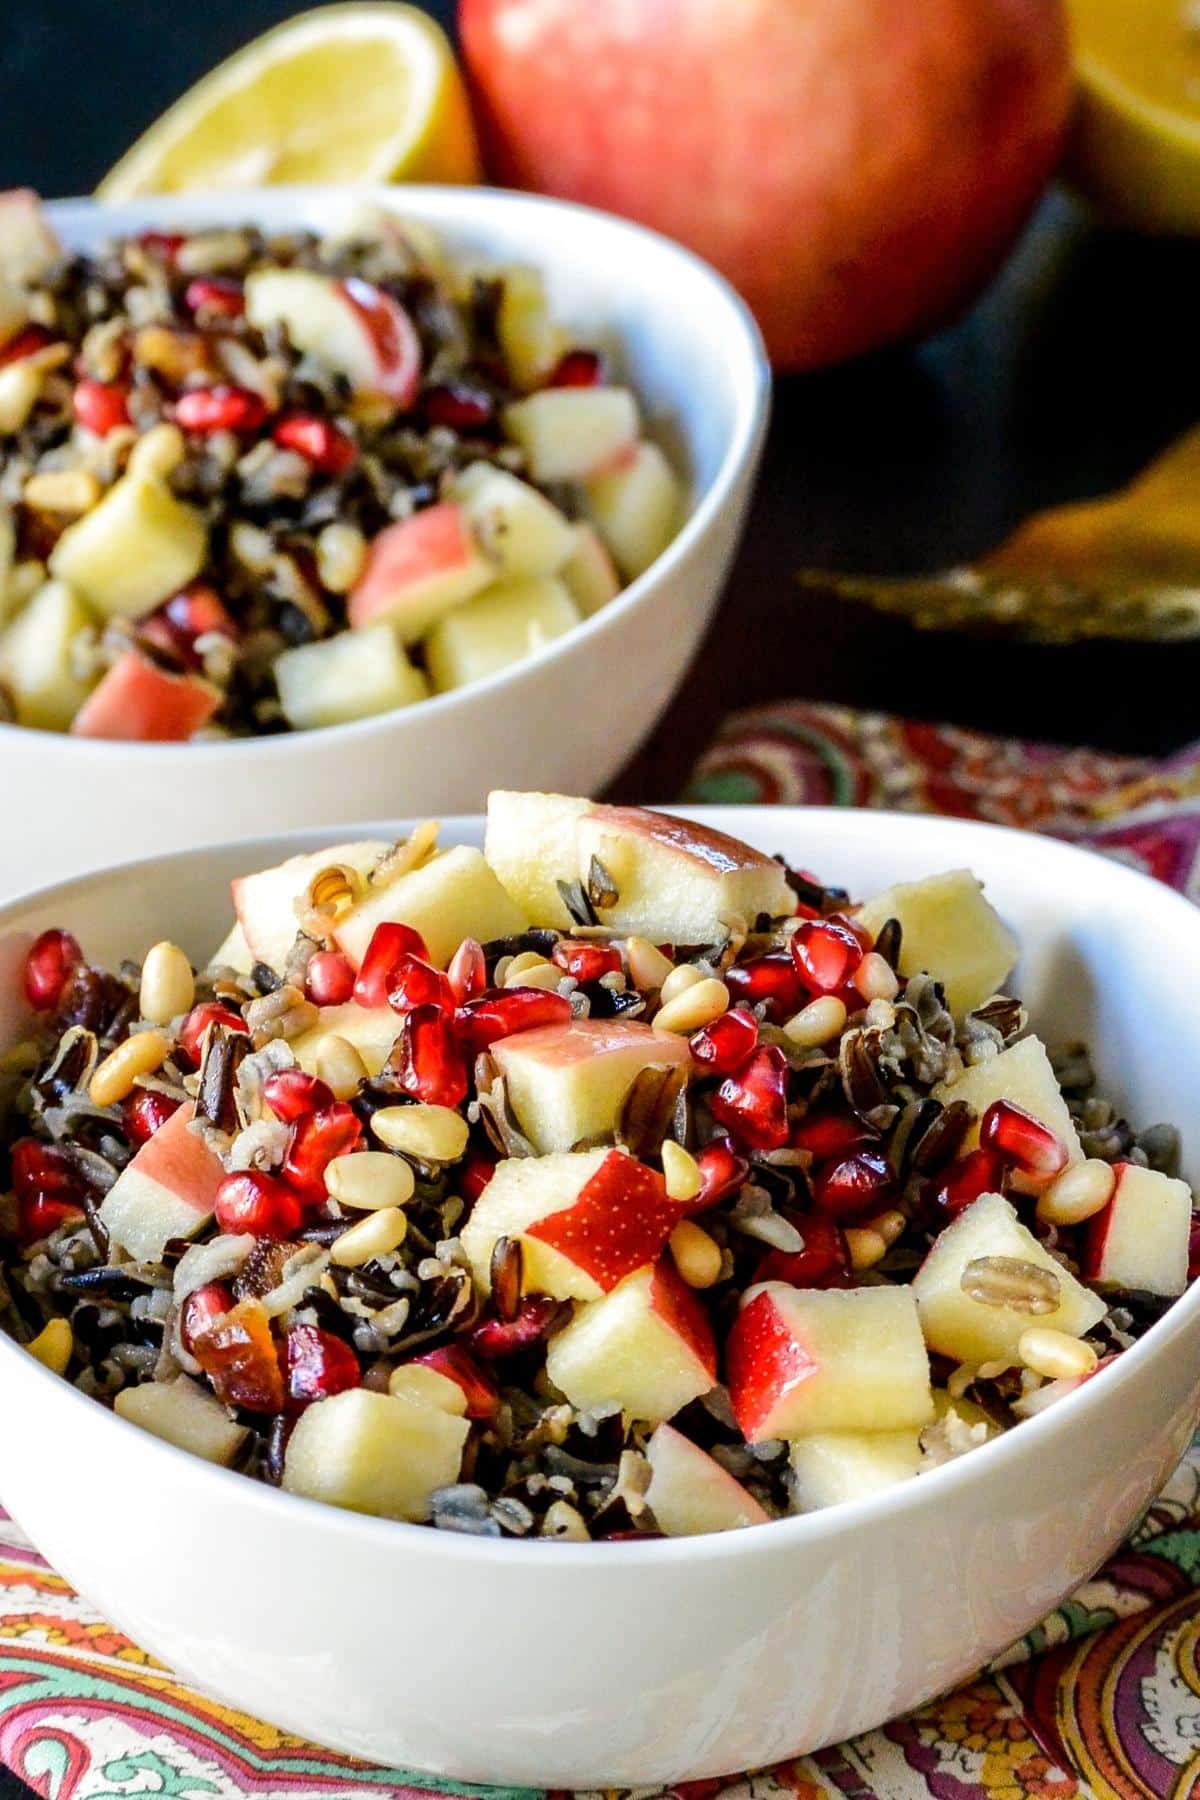 Bowls of wild rice salad with apple and lemon in the background.